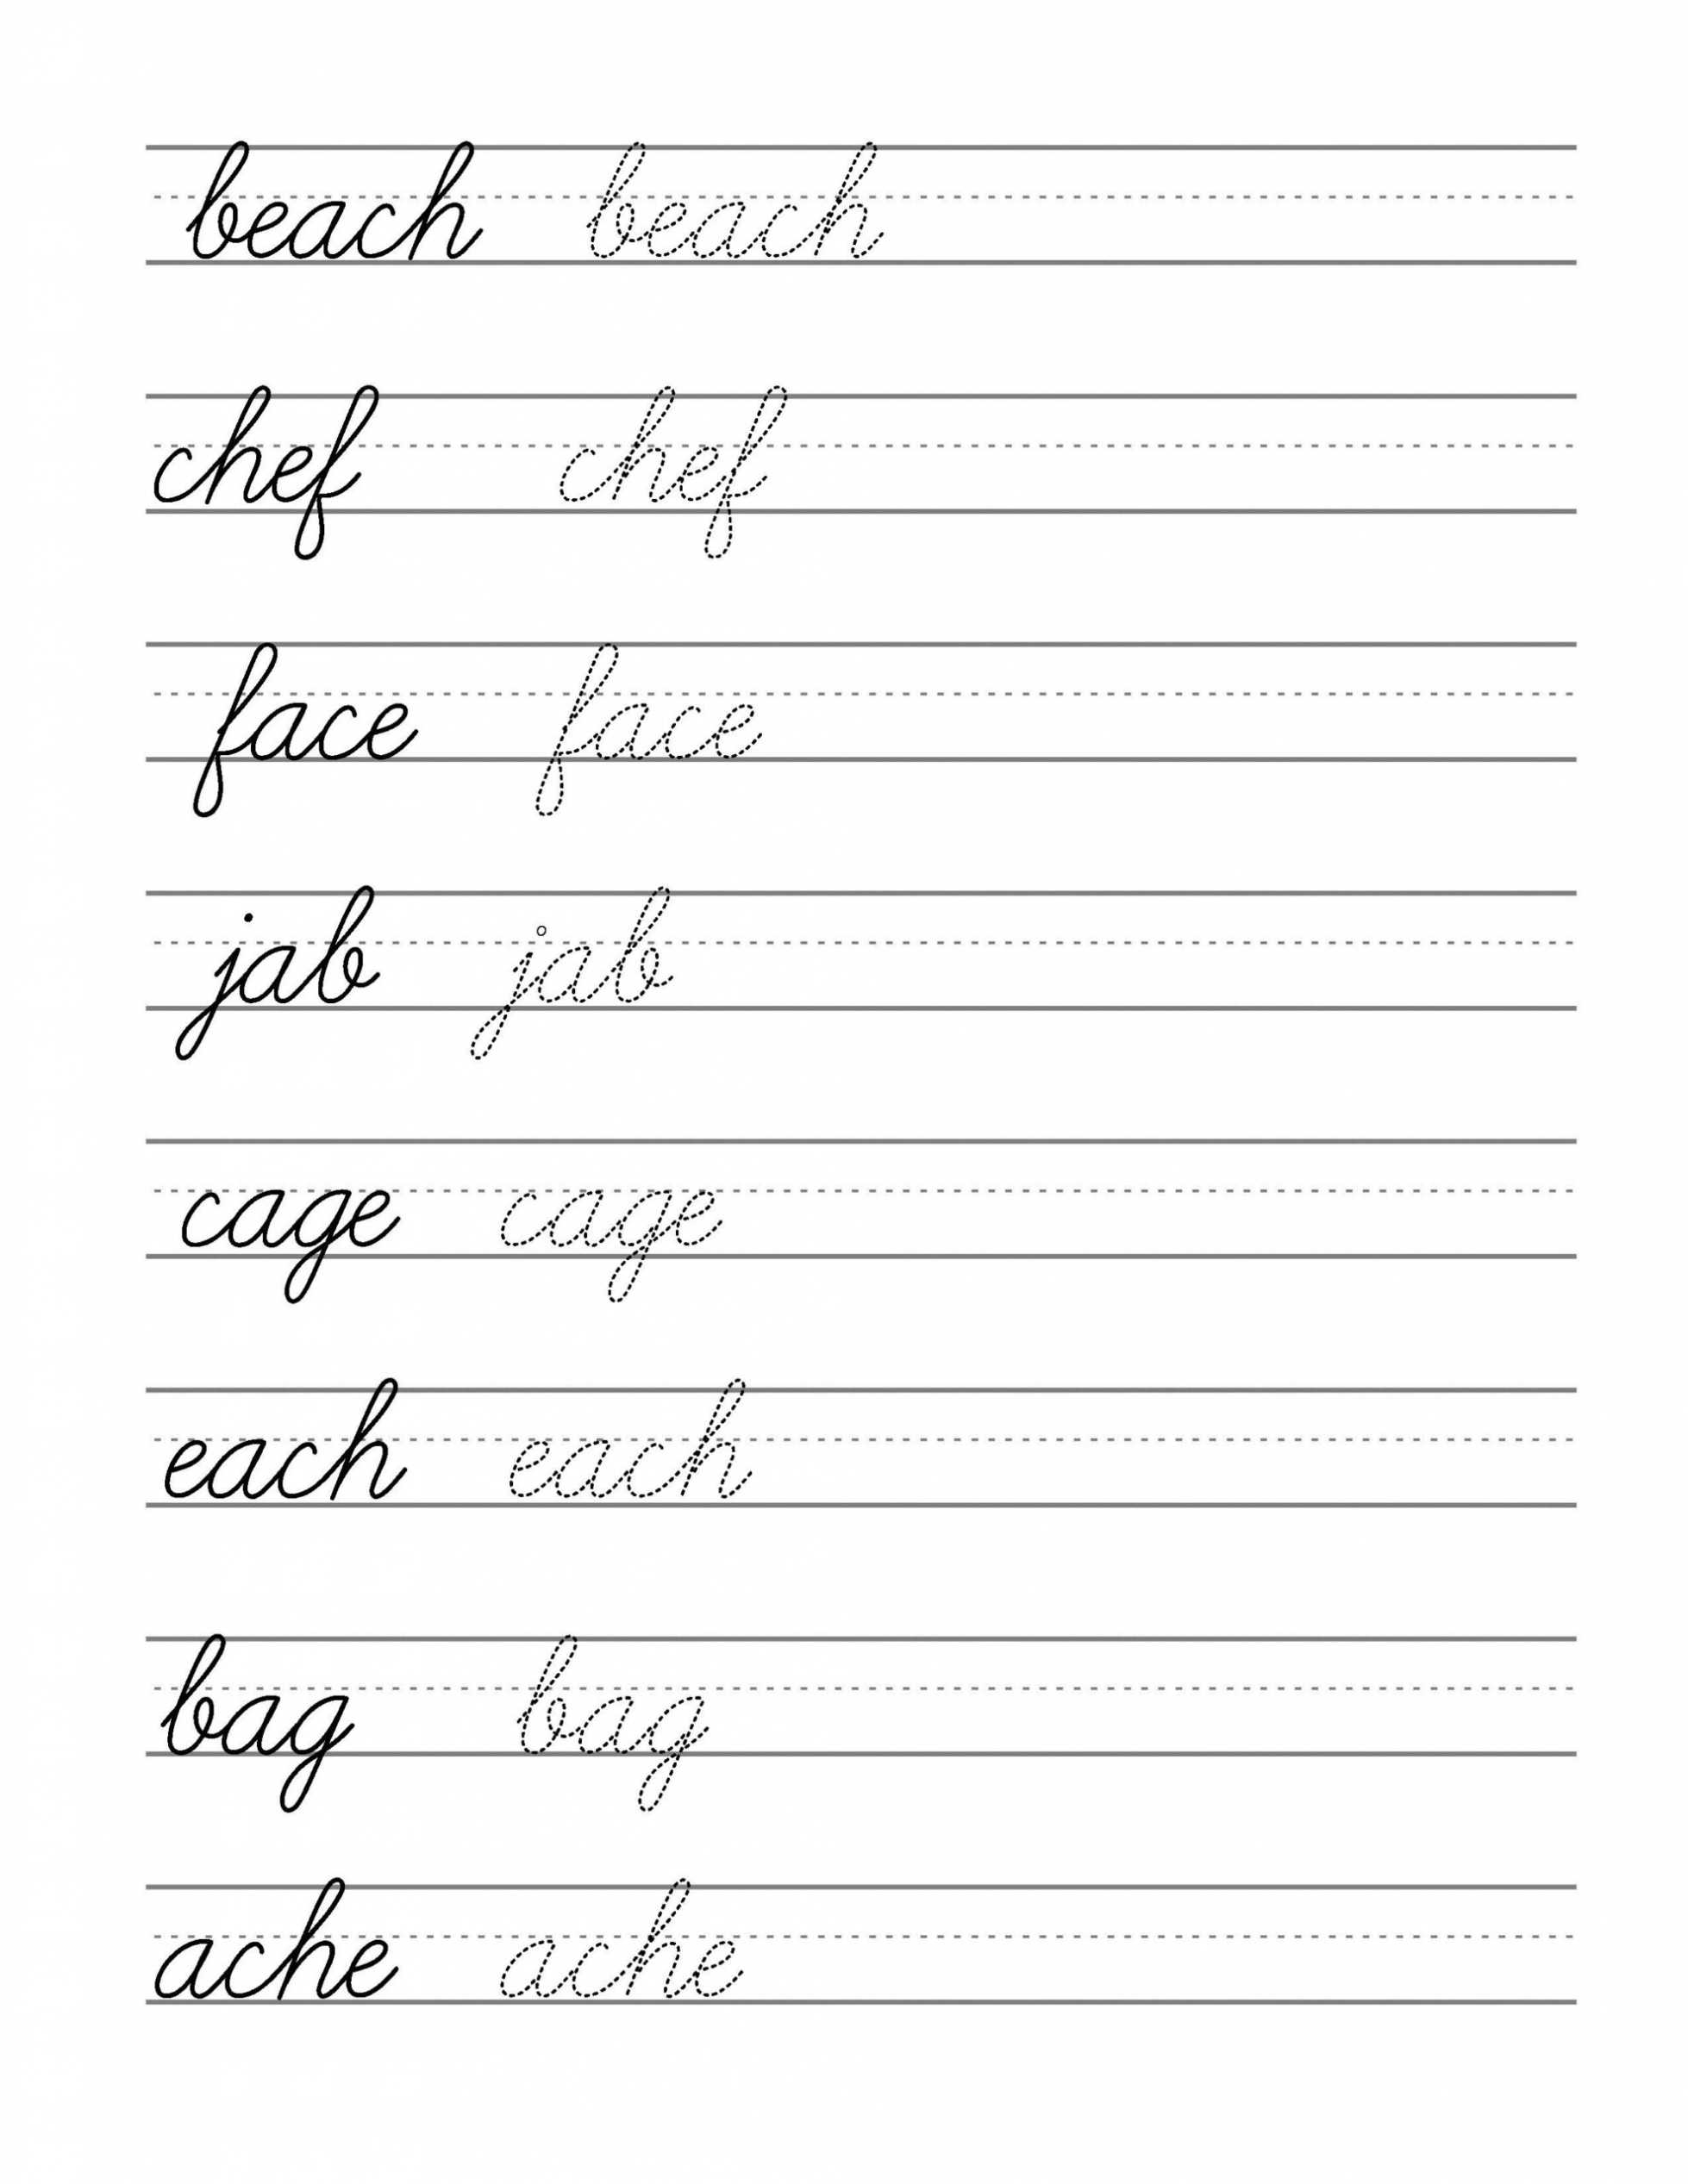 Worksheets : Free Beginning Cursive Writing Template Part regarding Handwriting Without Tears Letter Templates